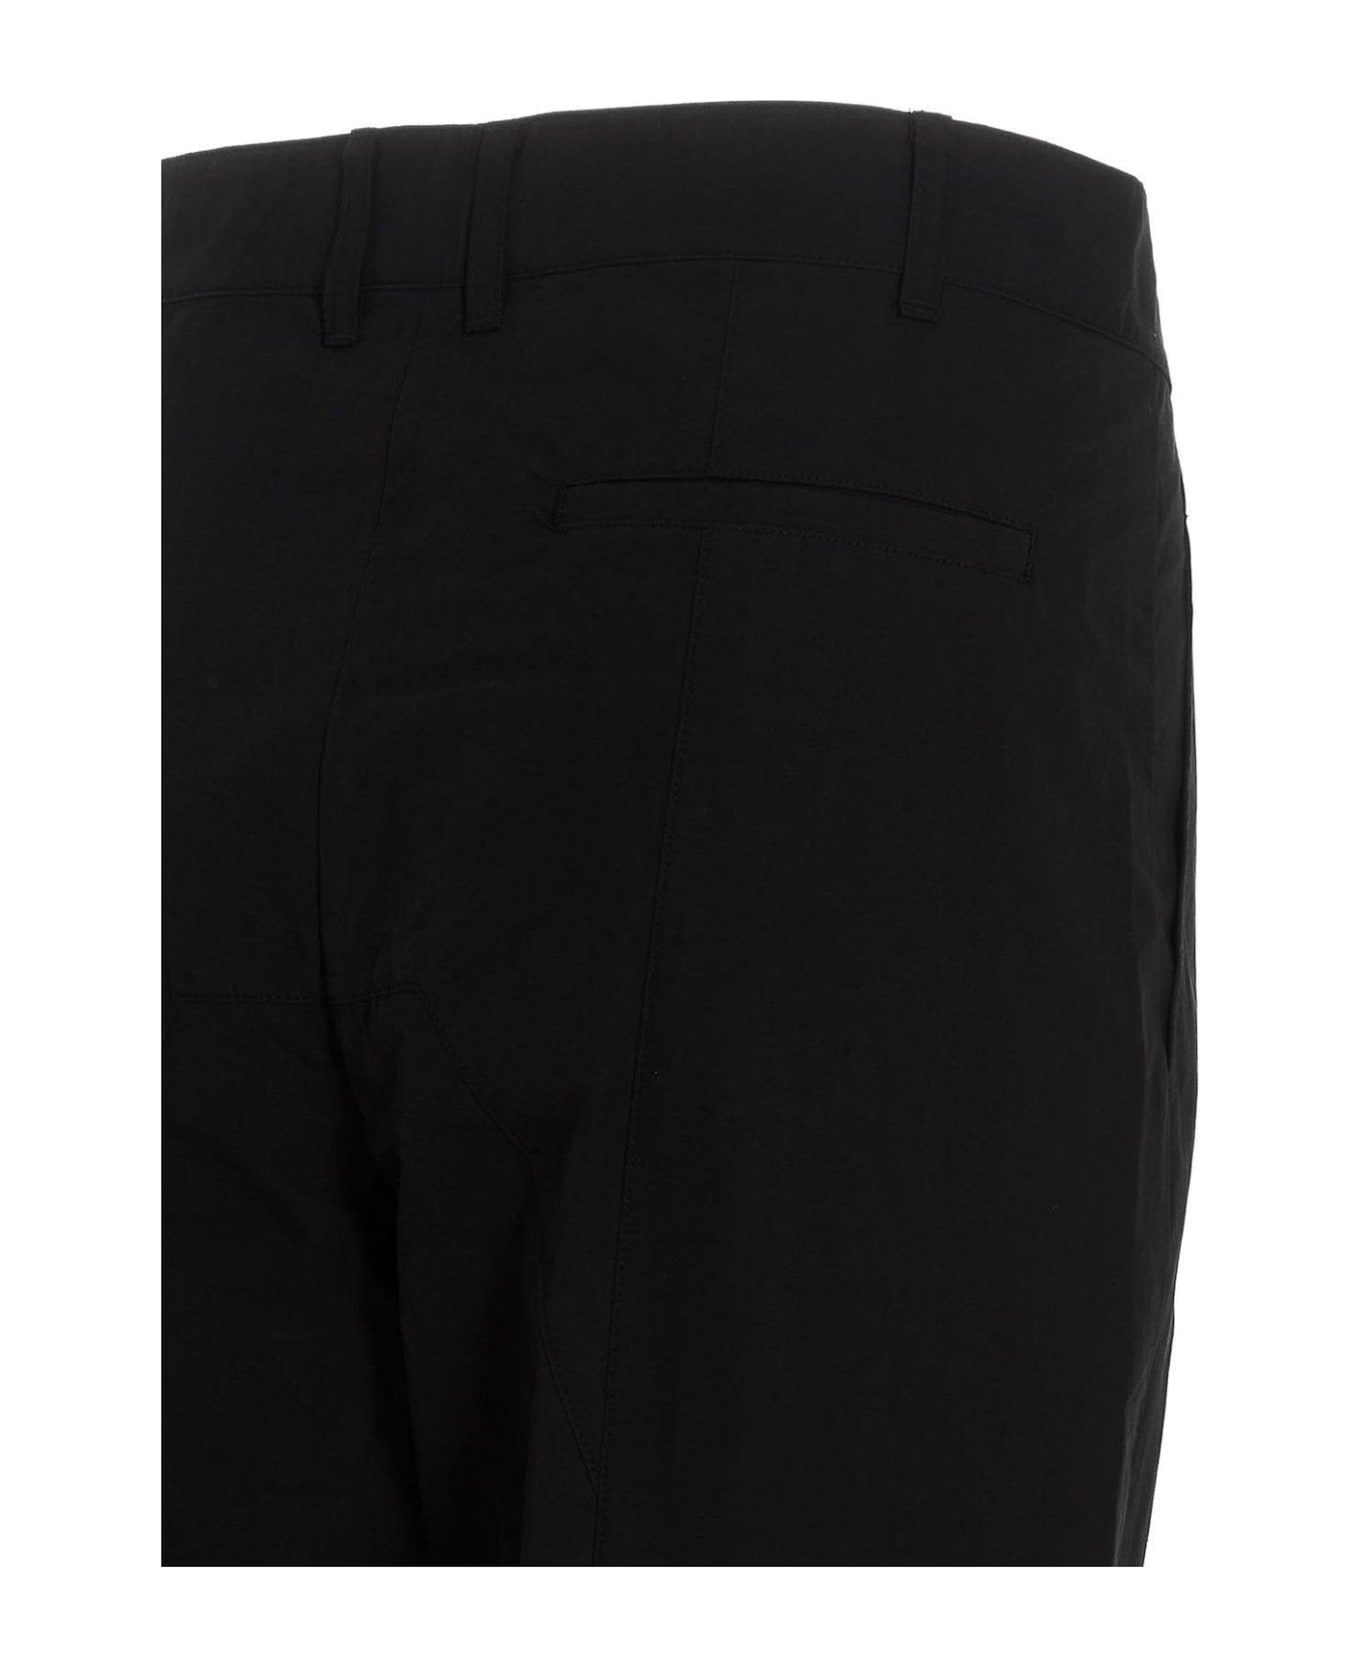 A-COLD-WALL Mid-rise Circuit Cargo Pants - BLACK ボトムス